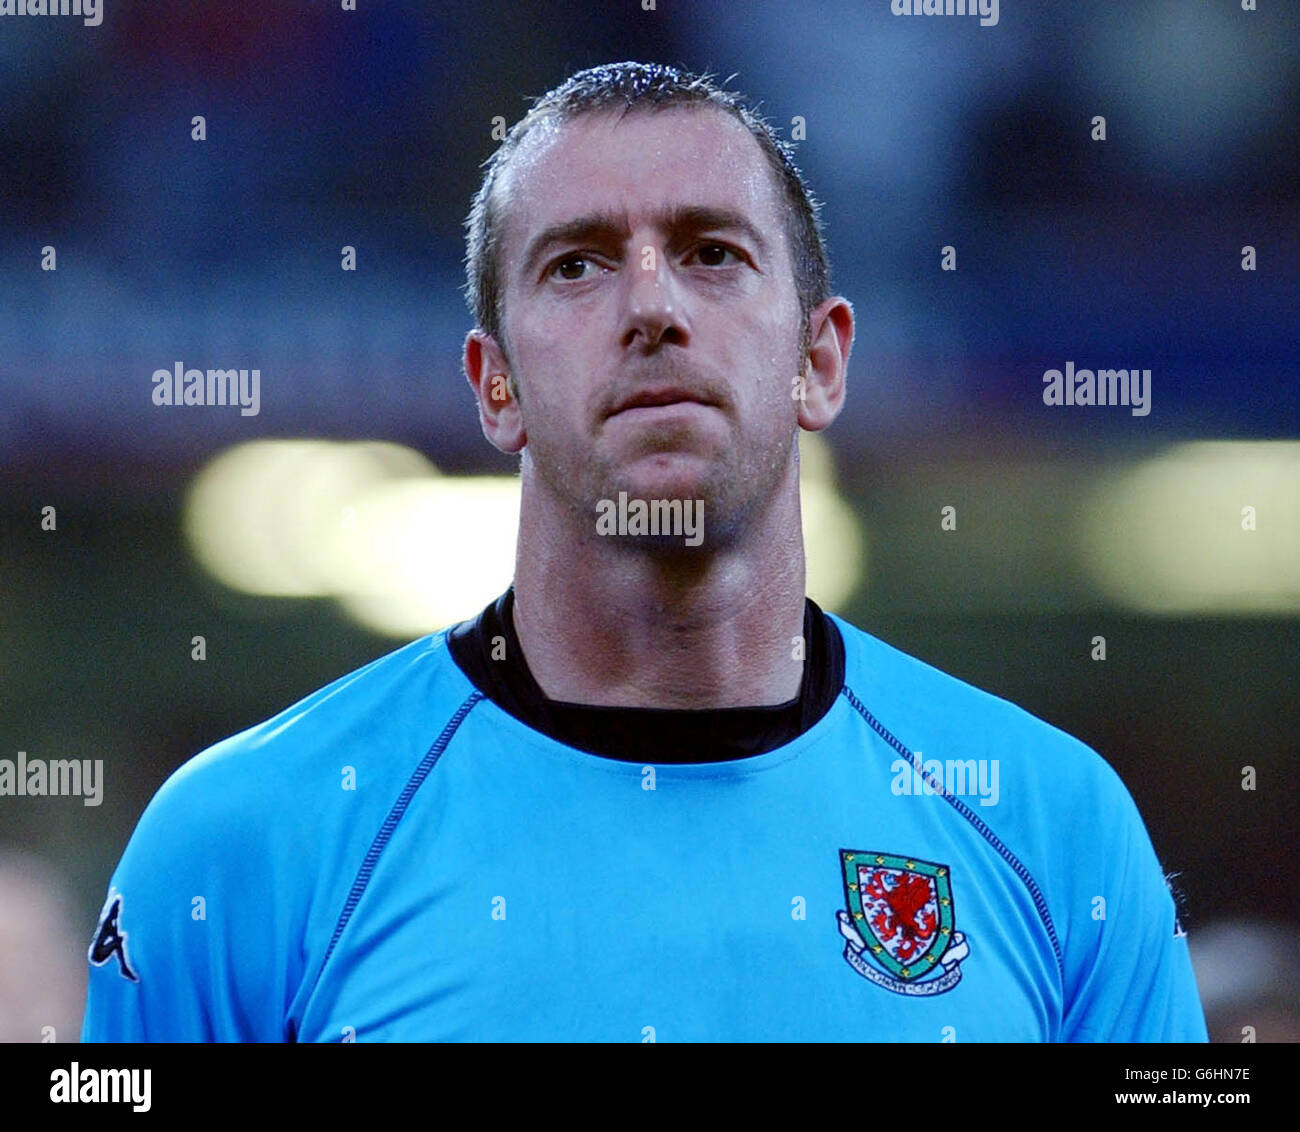 ; Wales's goalkeeper Paul Jones ahead of the game against Serbia and Montenegro during the European Championships qualifying match at the Millennium Stadium, Cardiff. Stock Photo